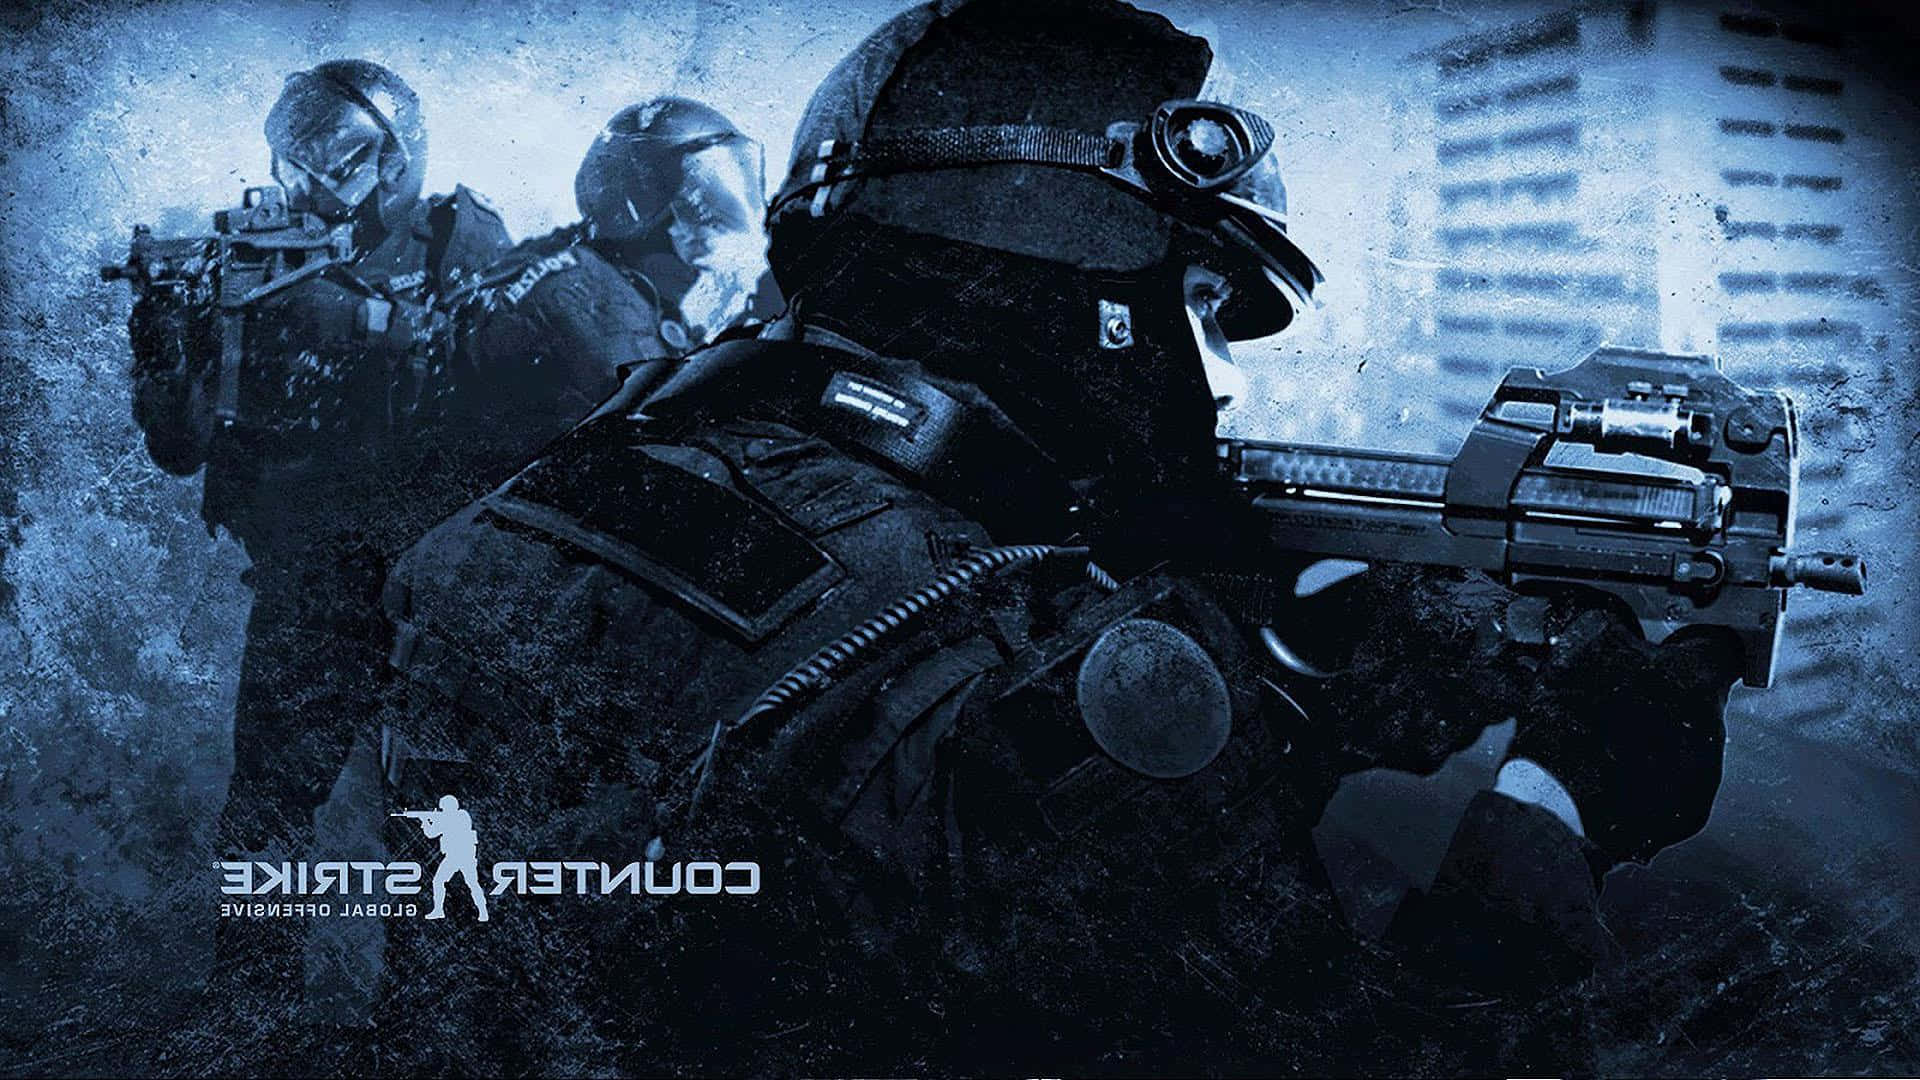 Outwit, Outsmart and Outlast: Learn to Dominate the Battlefield in Counter-Strike Wallpaper